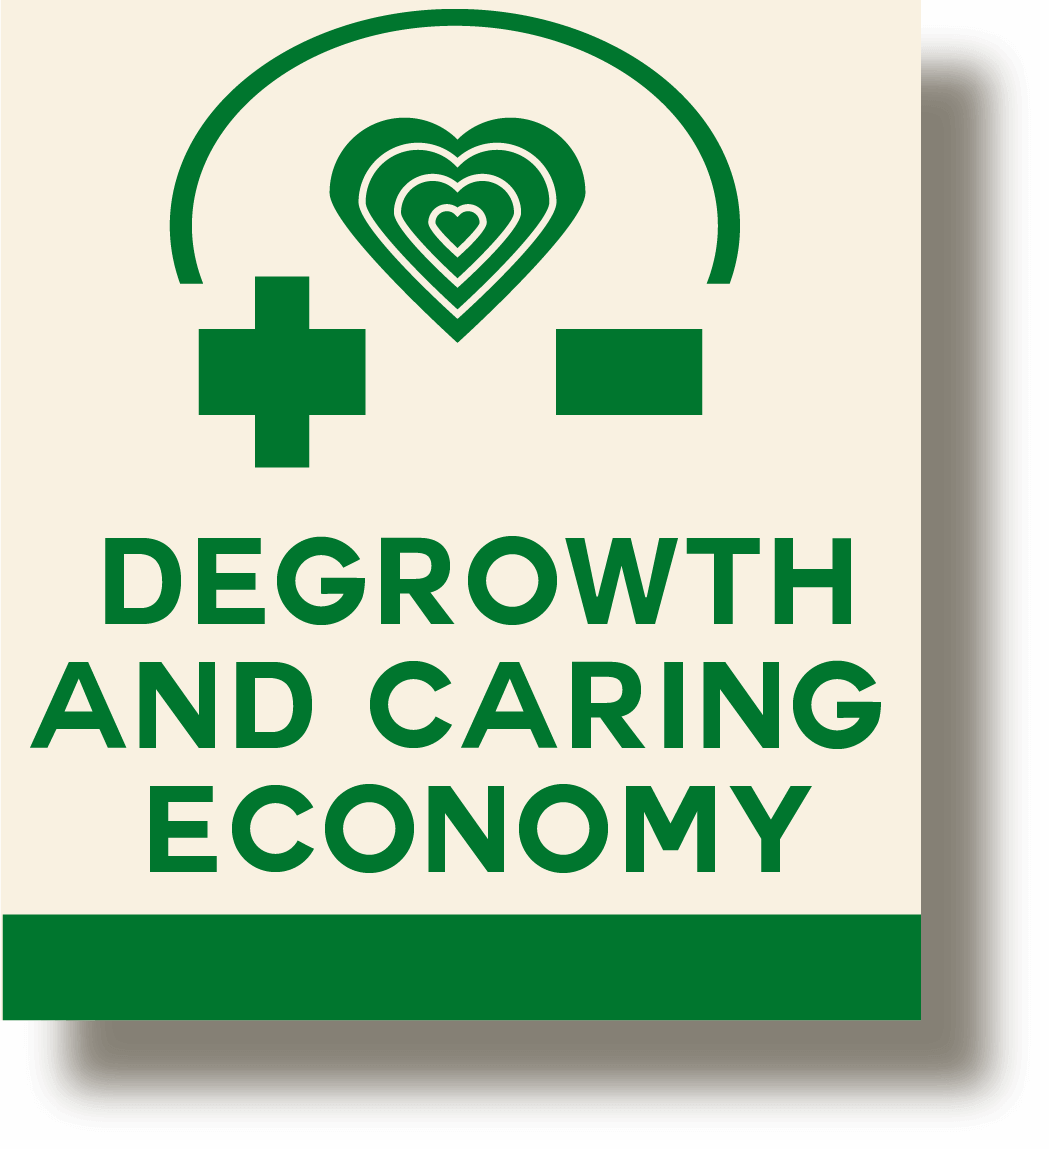 Caring & Degrowth